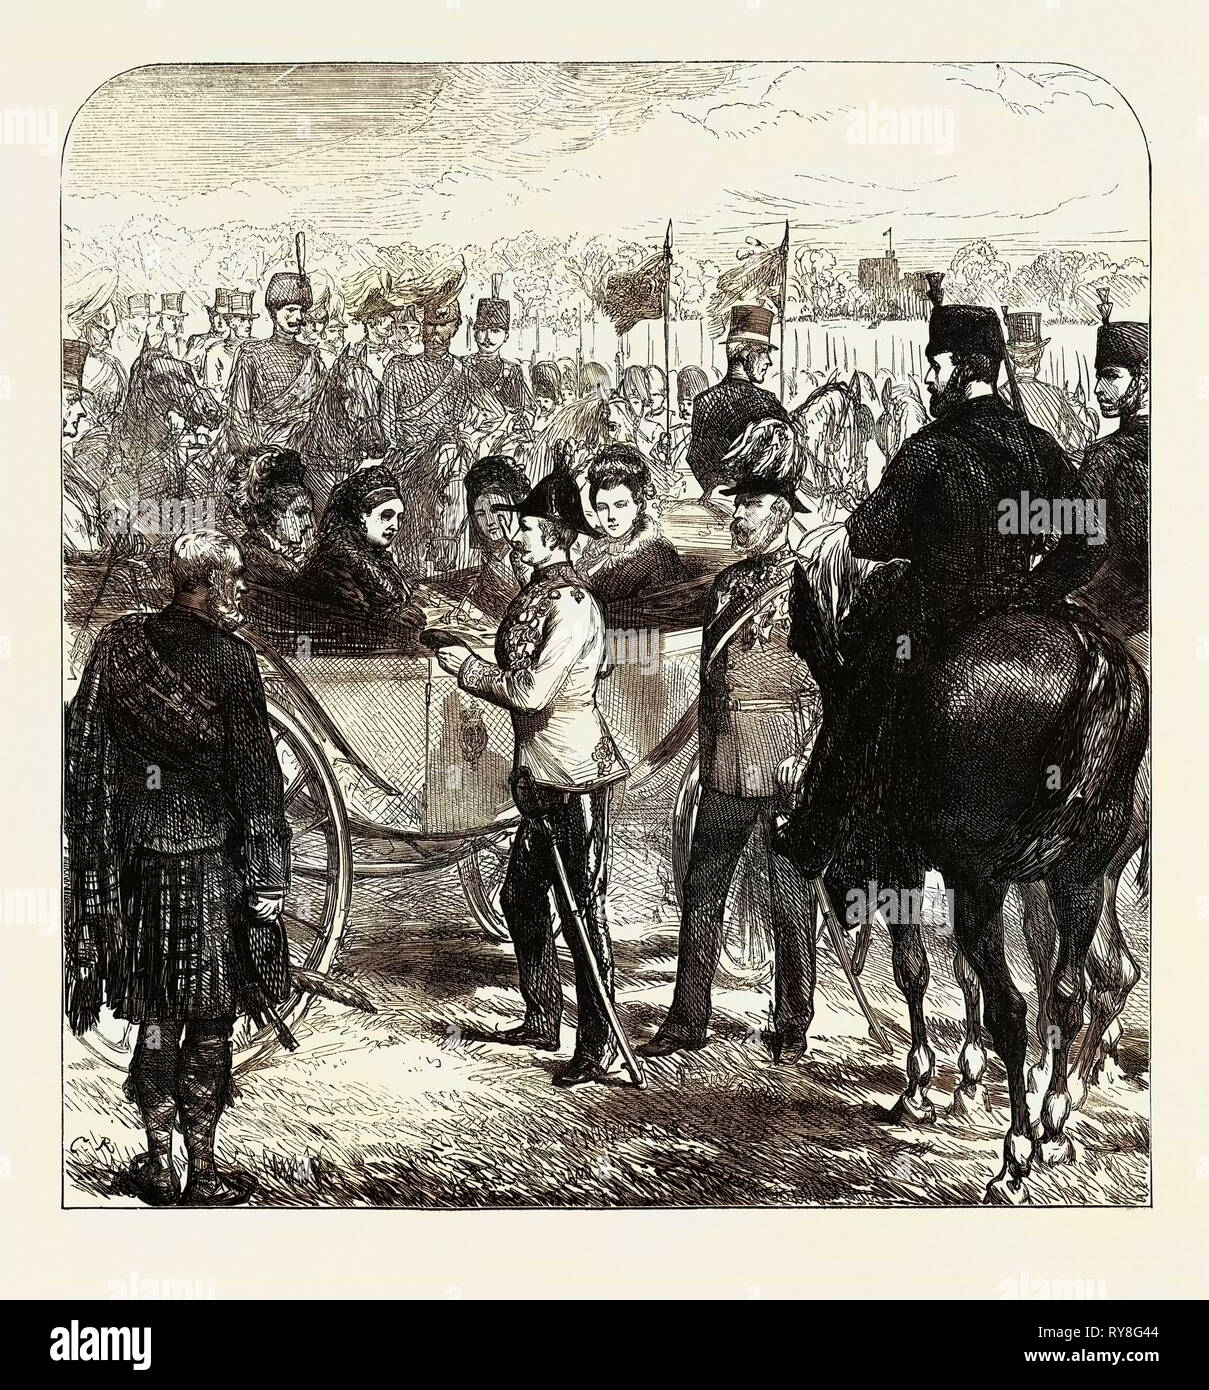 Review at Windsor: The Queen Presenting the Cross of St. Michael and St. George to Sir Garnet Wolseley 1874 Stock Photo